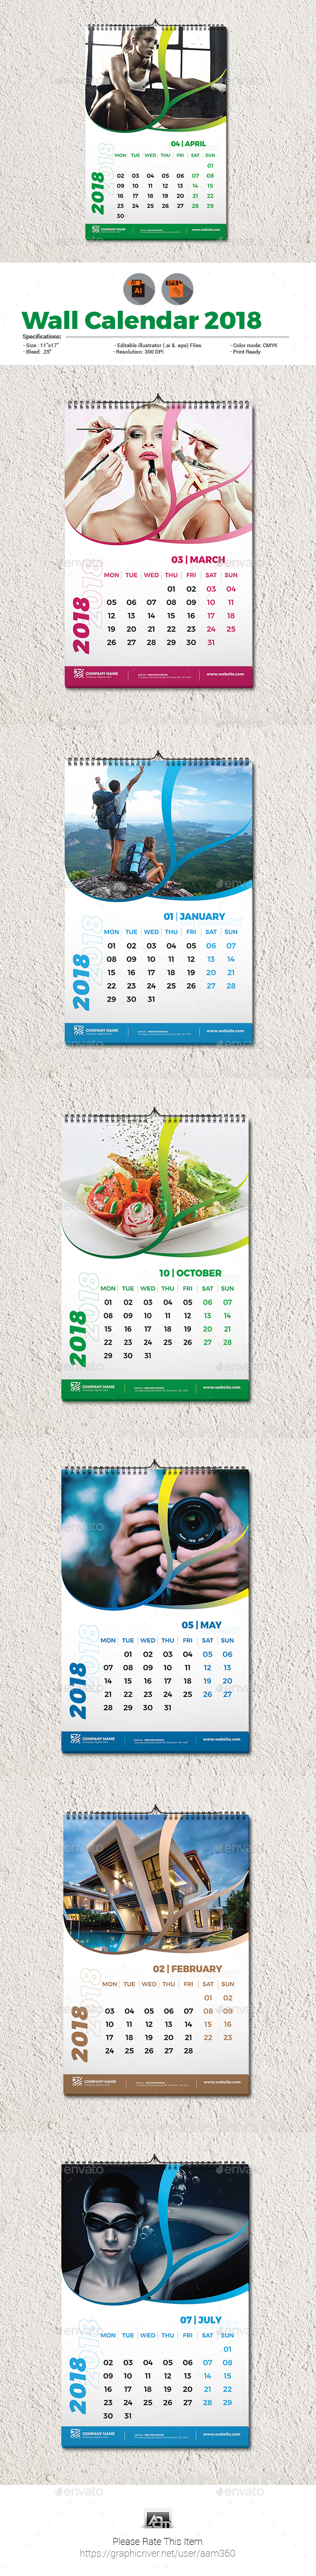 Wall Calendar Template by aam360 GraphicRiver